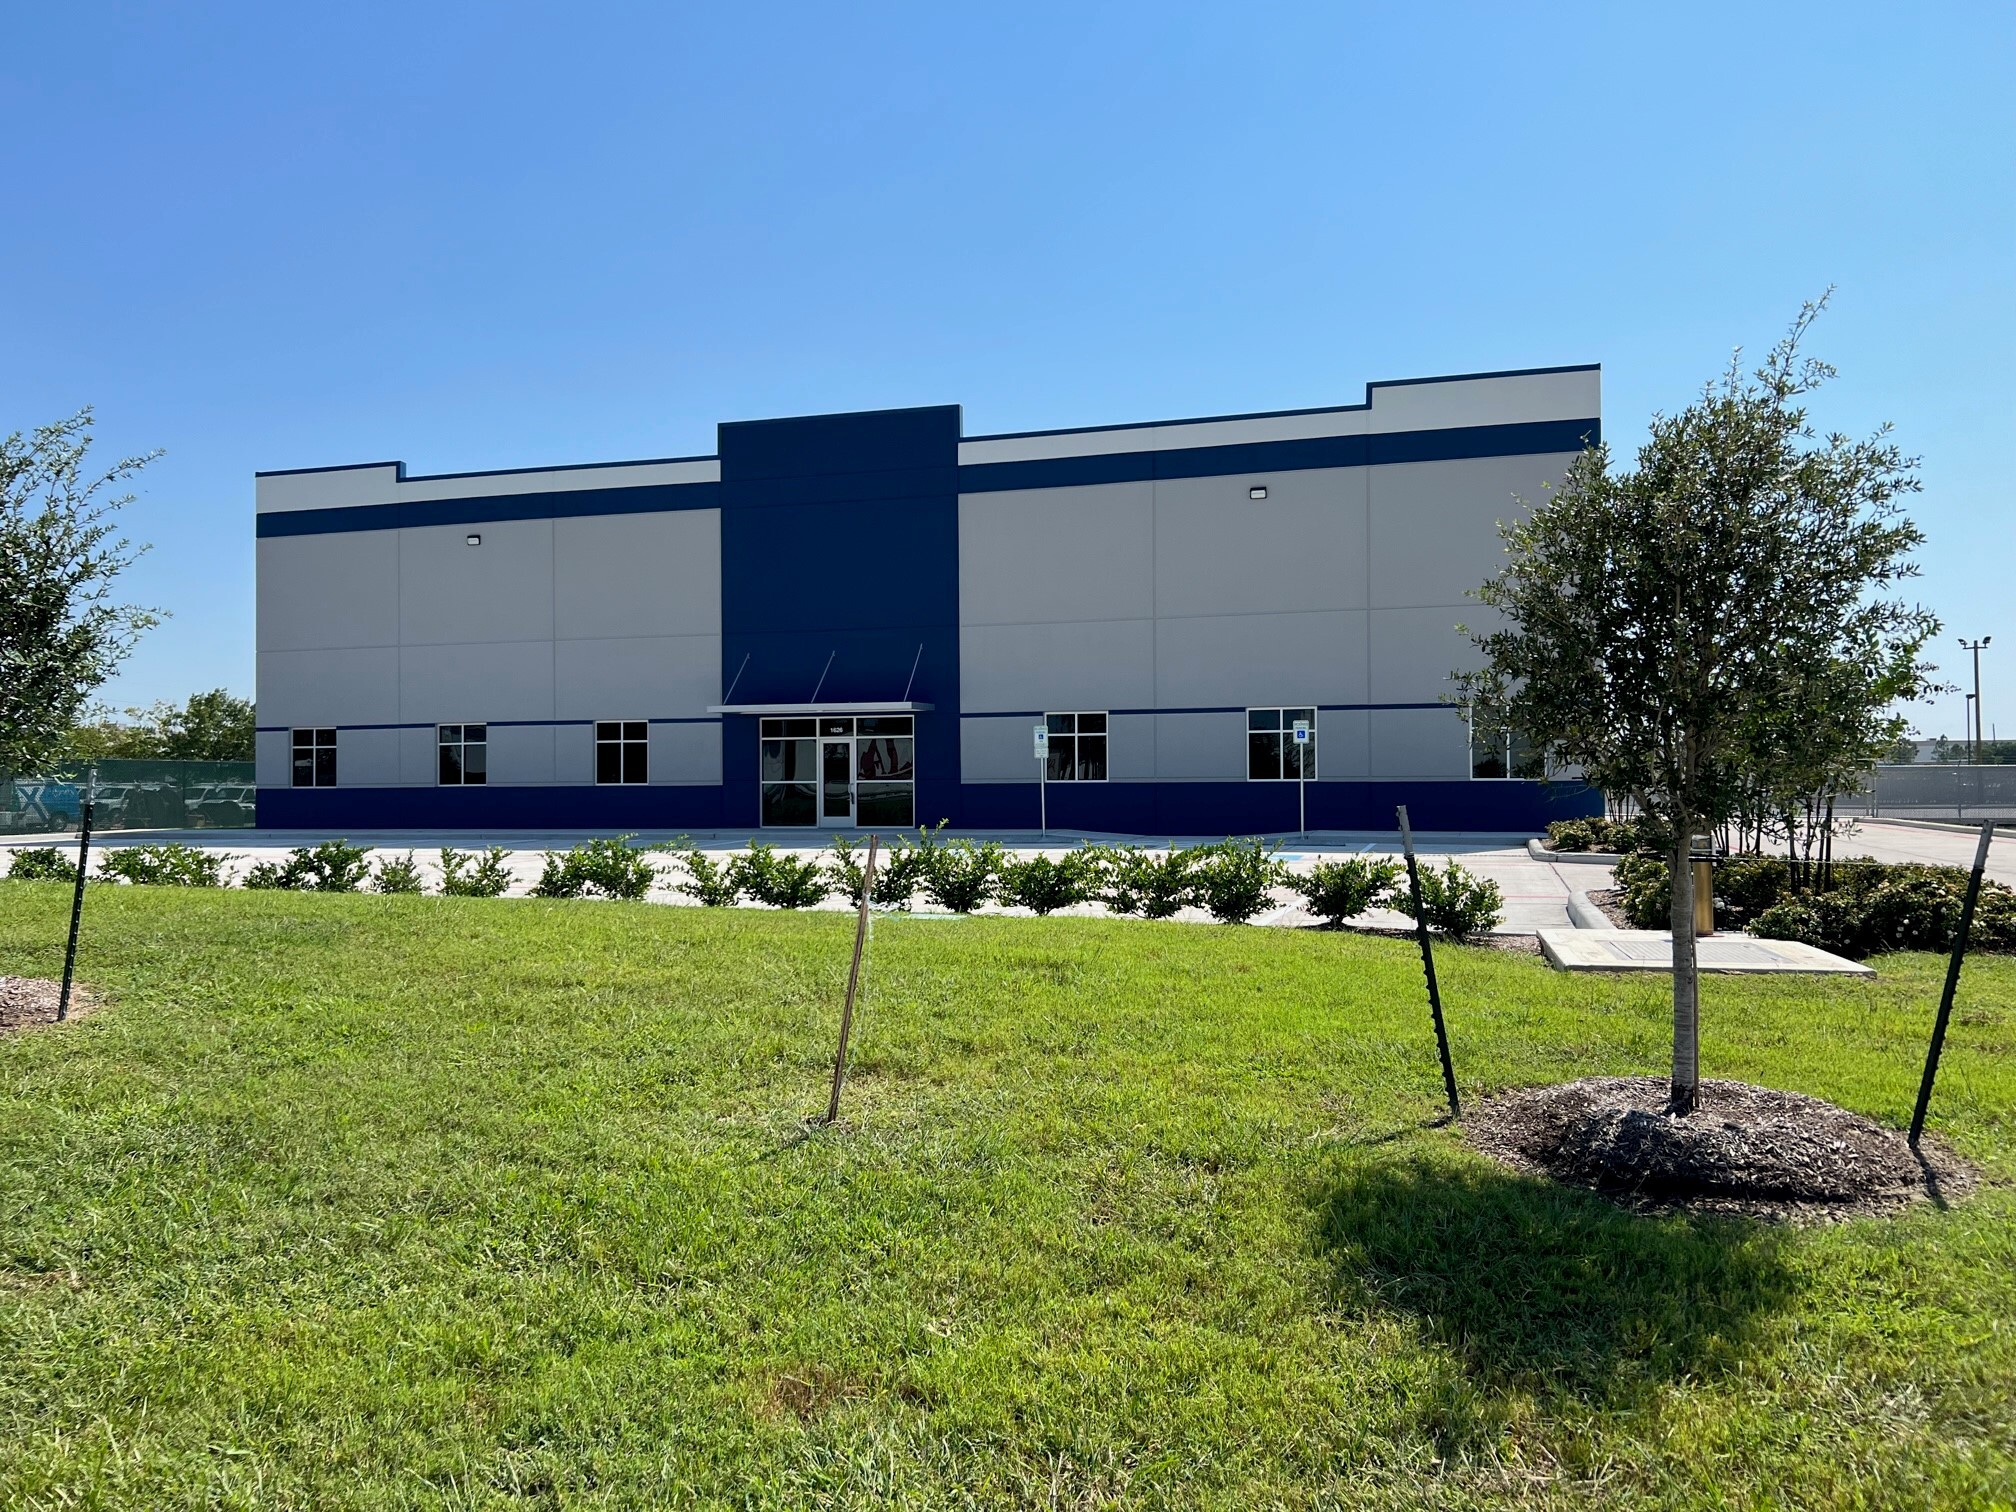 Partners Real Estate arranges 18,700-sq.-ft. lease with Power Temp Systems in Houston Partners Real Estate